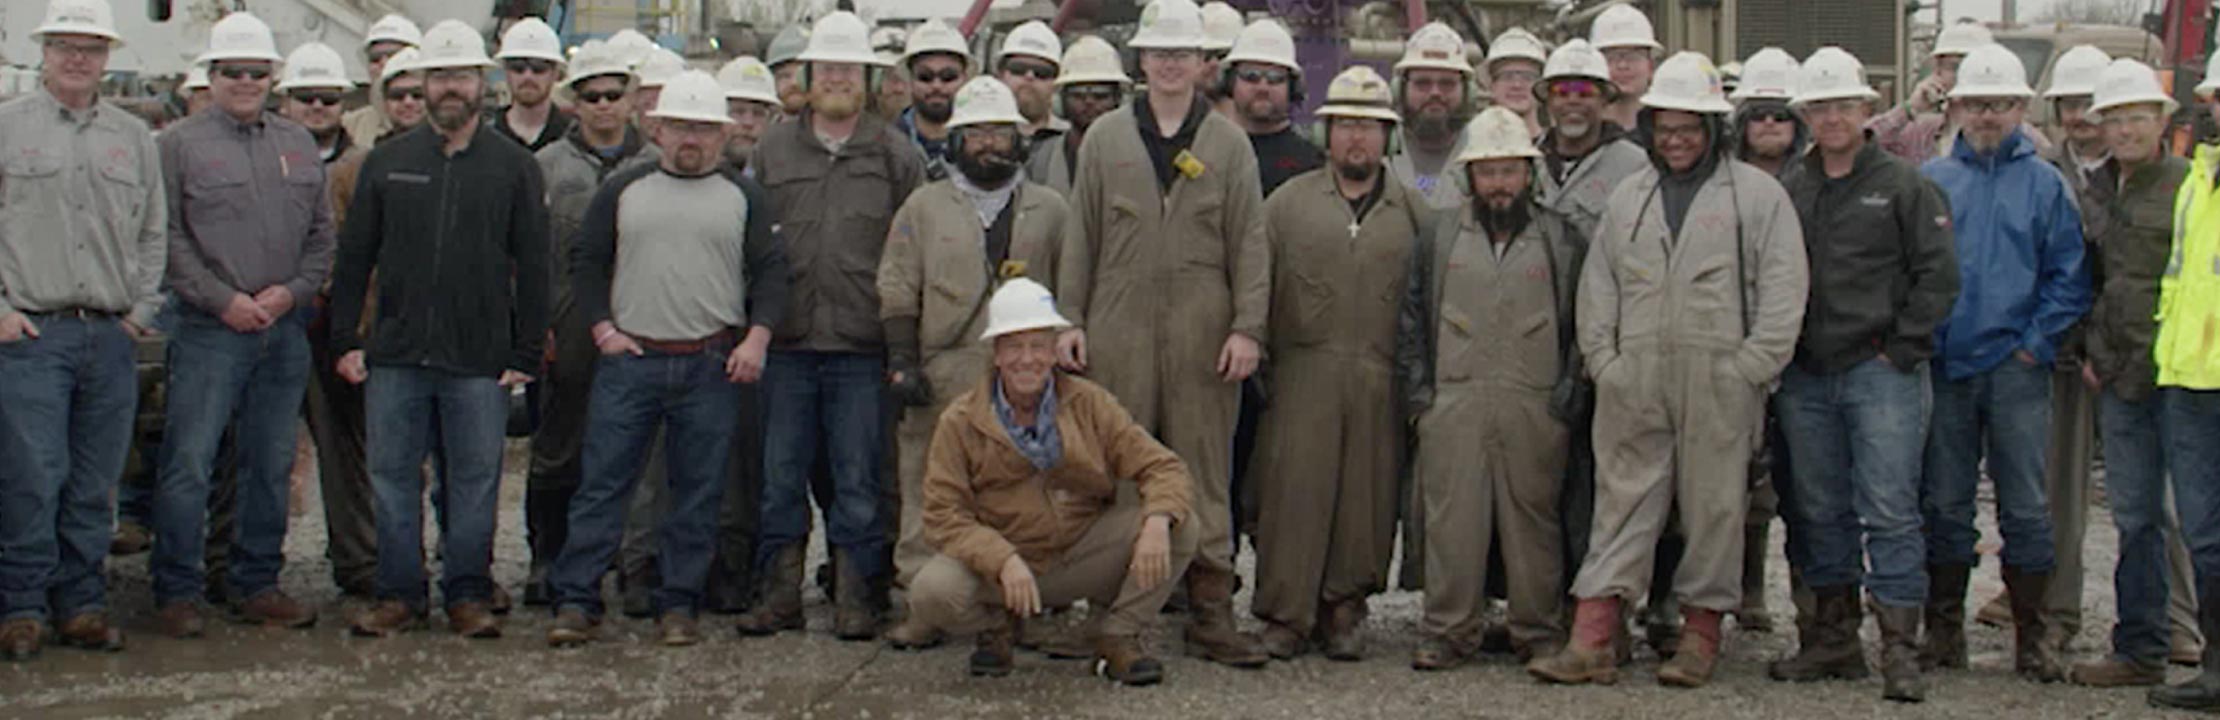 Mike Rowe and oil and gas workers group shot